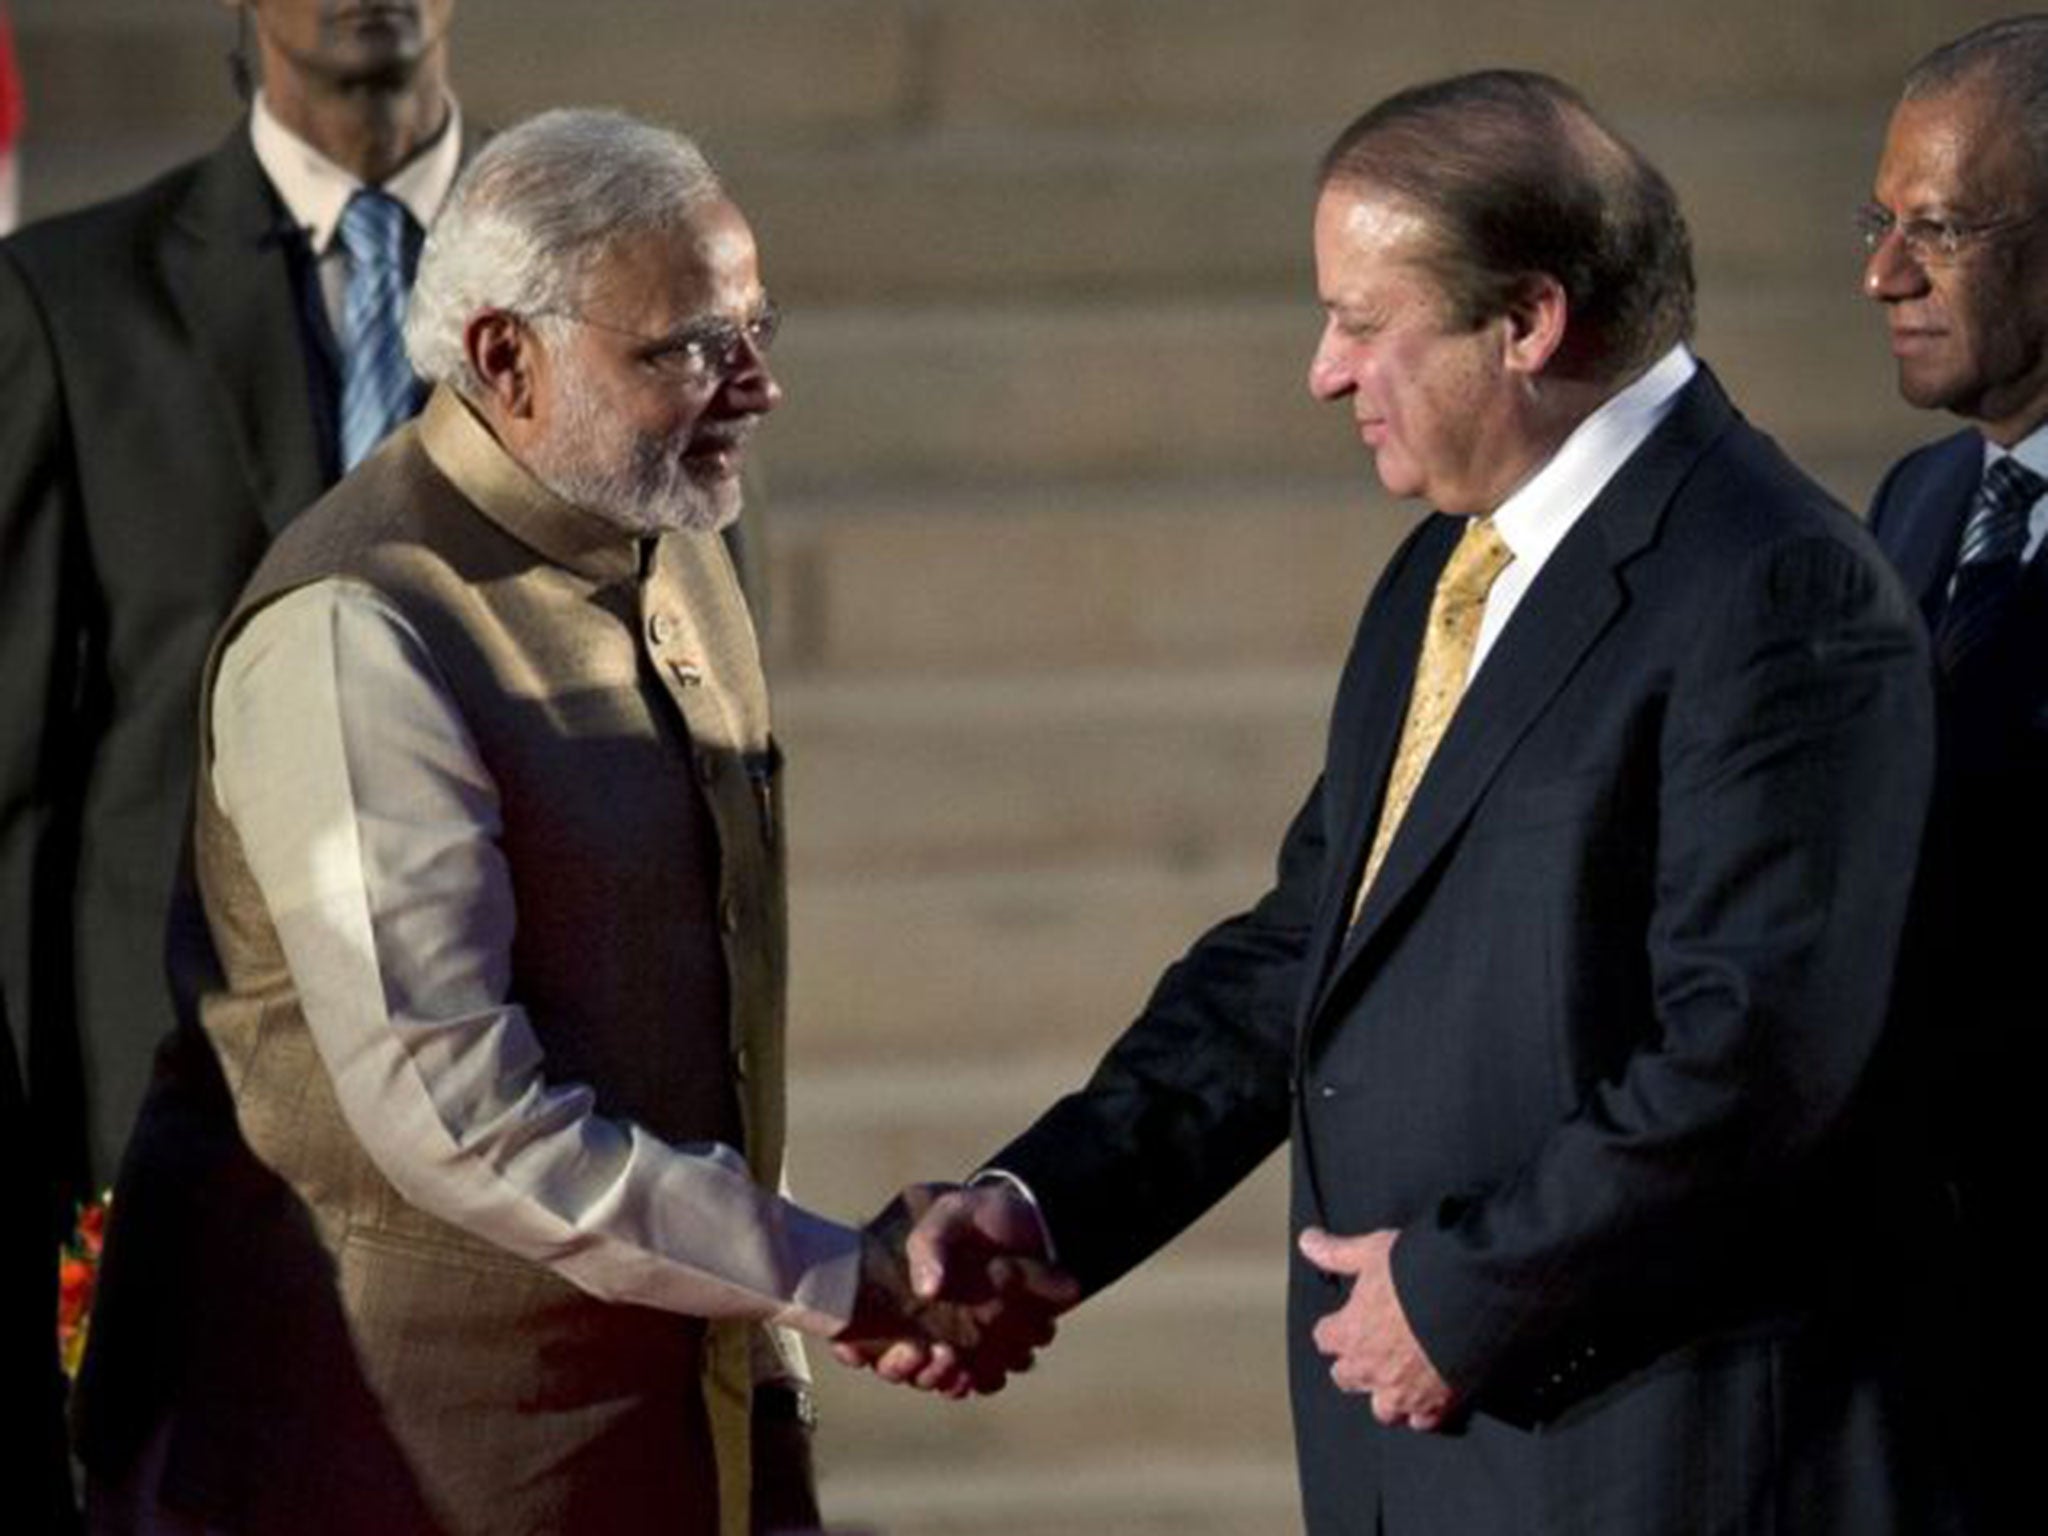 Modi (left) took the oath of office as India's new prime minister at the presidential palace, a moment made more historic by the presence of the leader of Pakistan, Nawaz Sharif